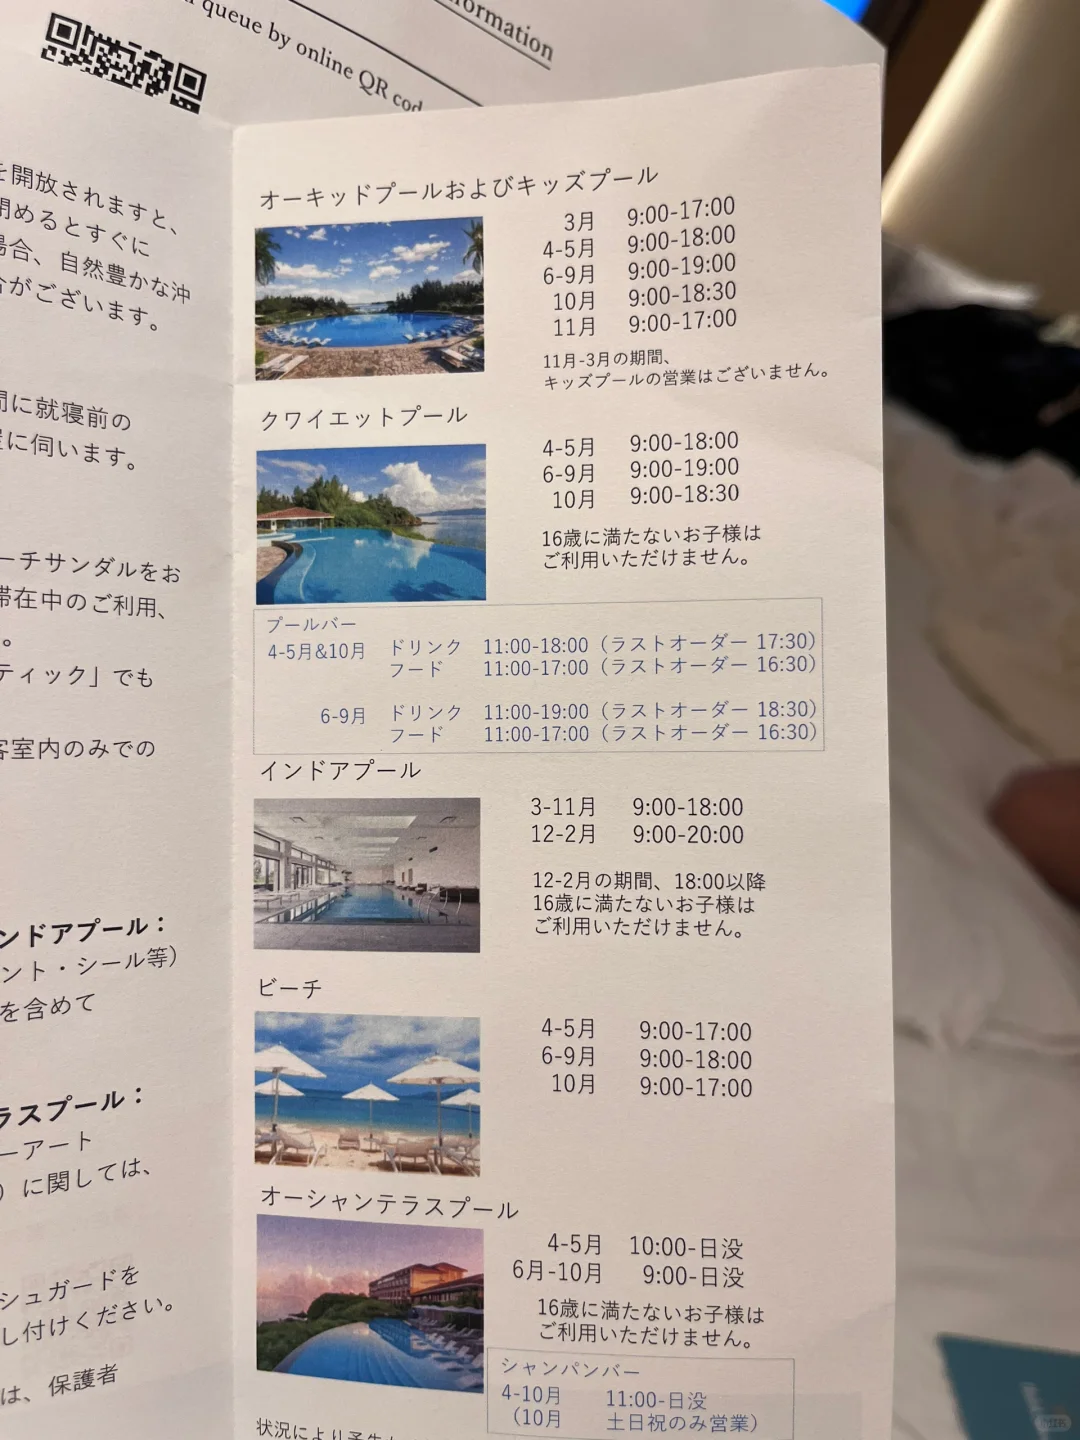 Okinawa-Okinawa Halekulani Hotel, the price and service are not equal, I will not come again